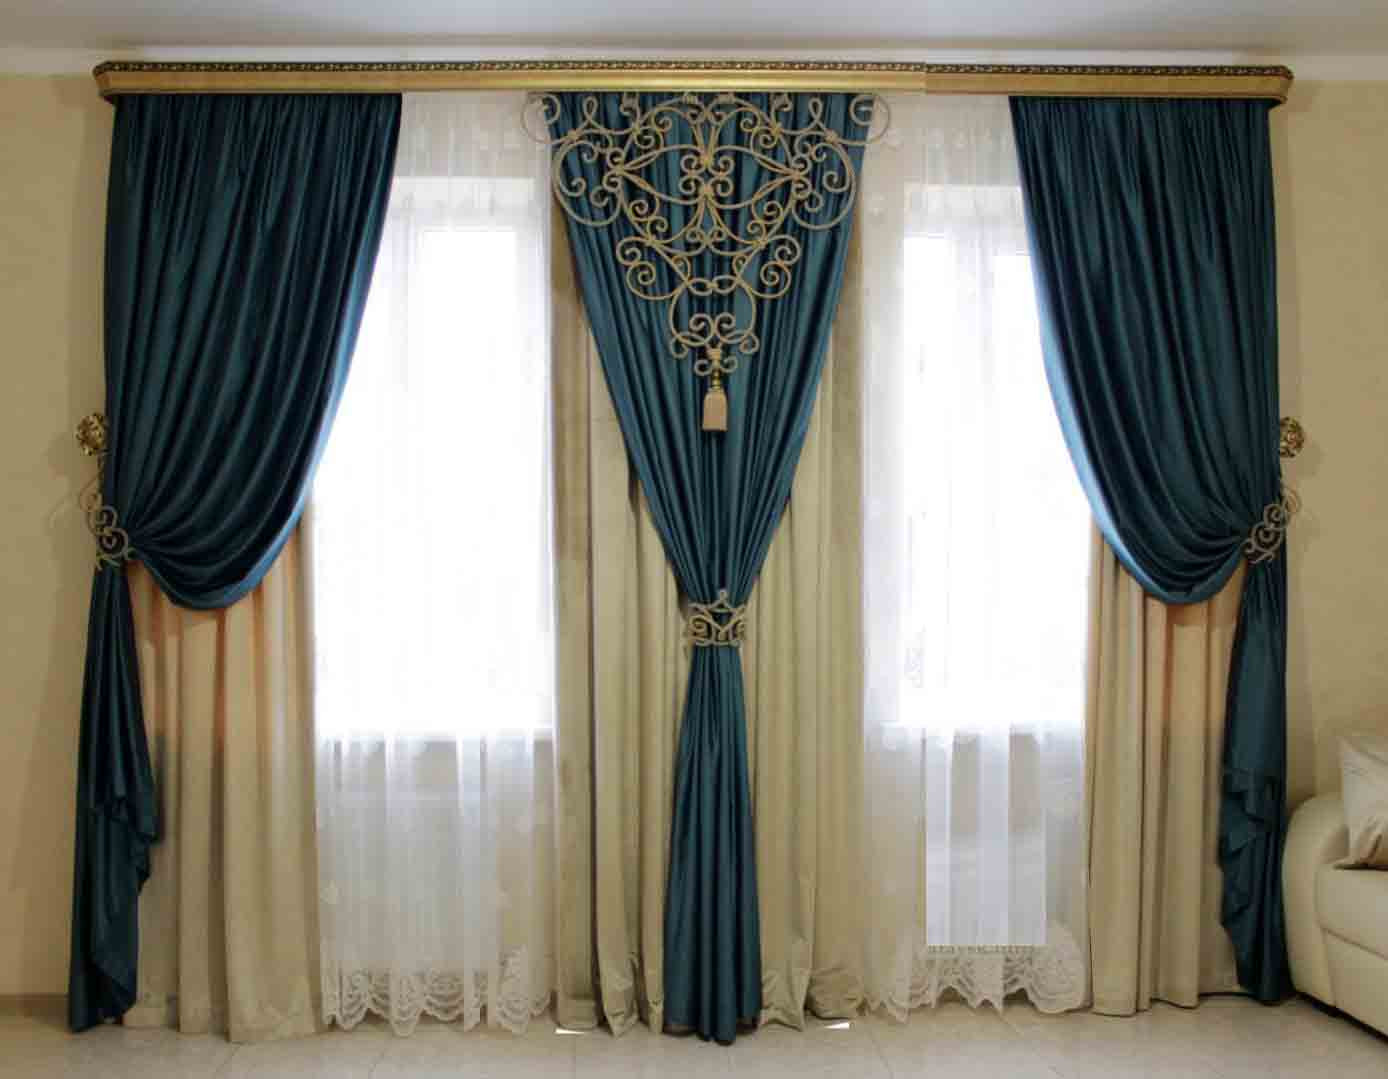 Curtain Style For Living Room
 50 Stylish modern living room curtains designs ideas colors